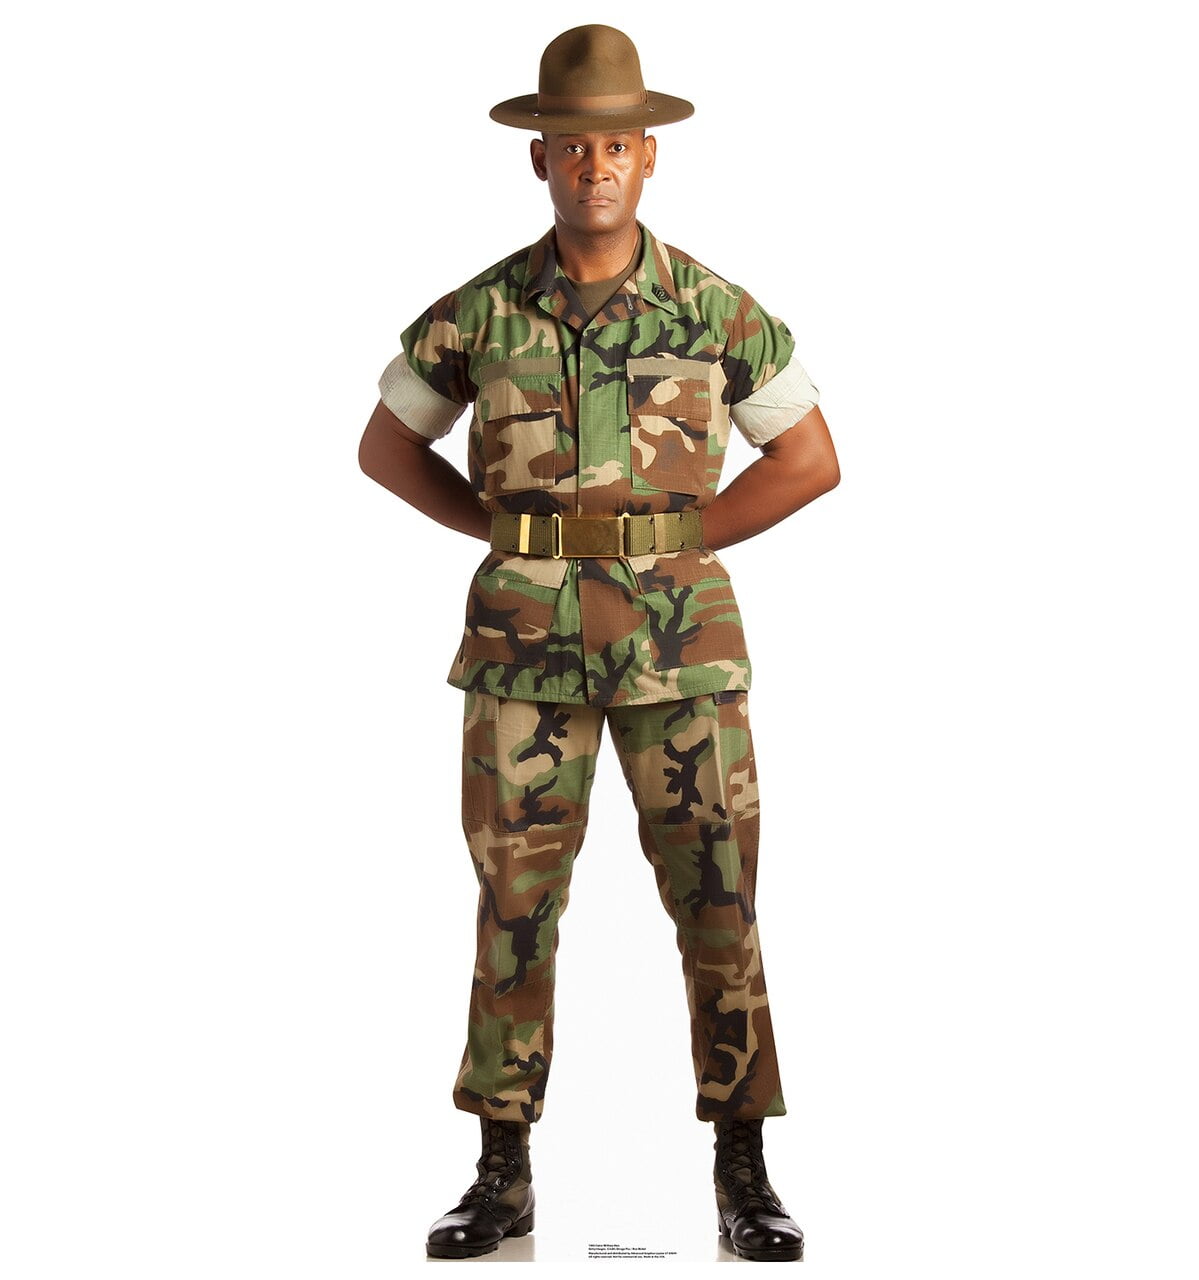 SOLDIER WOMAN CARDBOARD CUTOUT Standup Standee Poster Camo Army Marine Female 